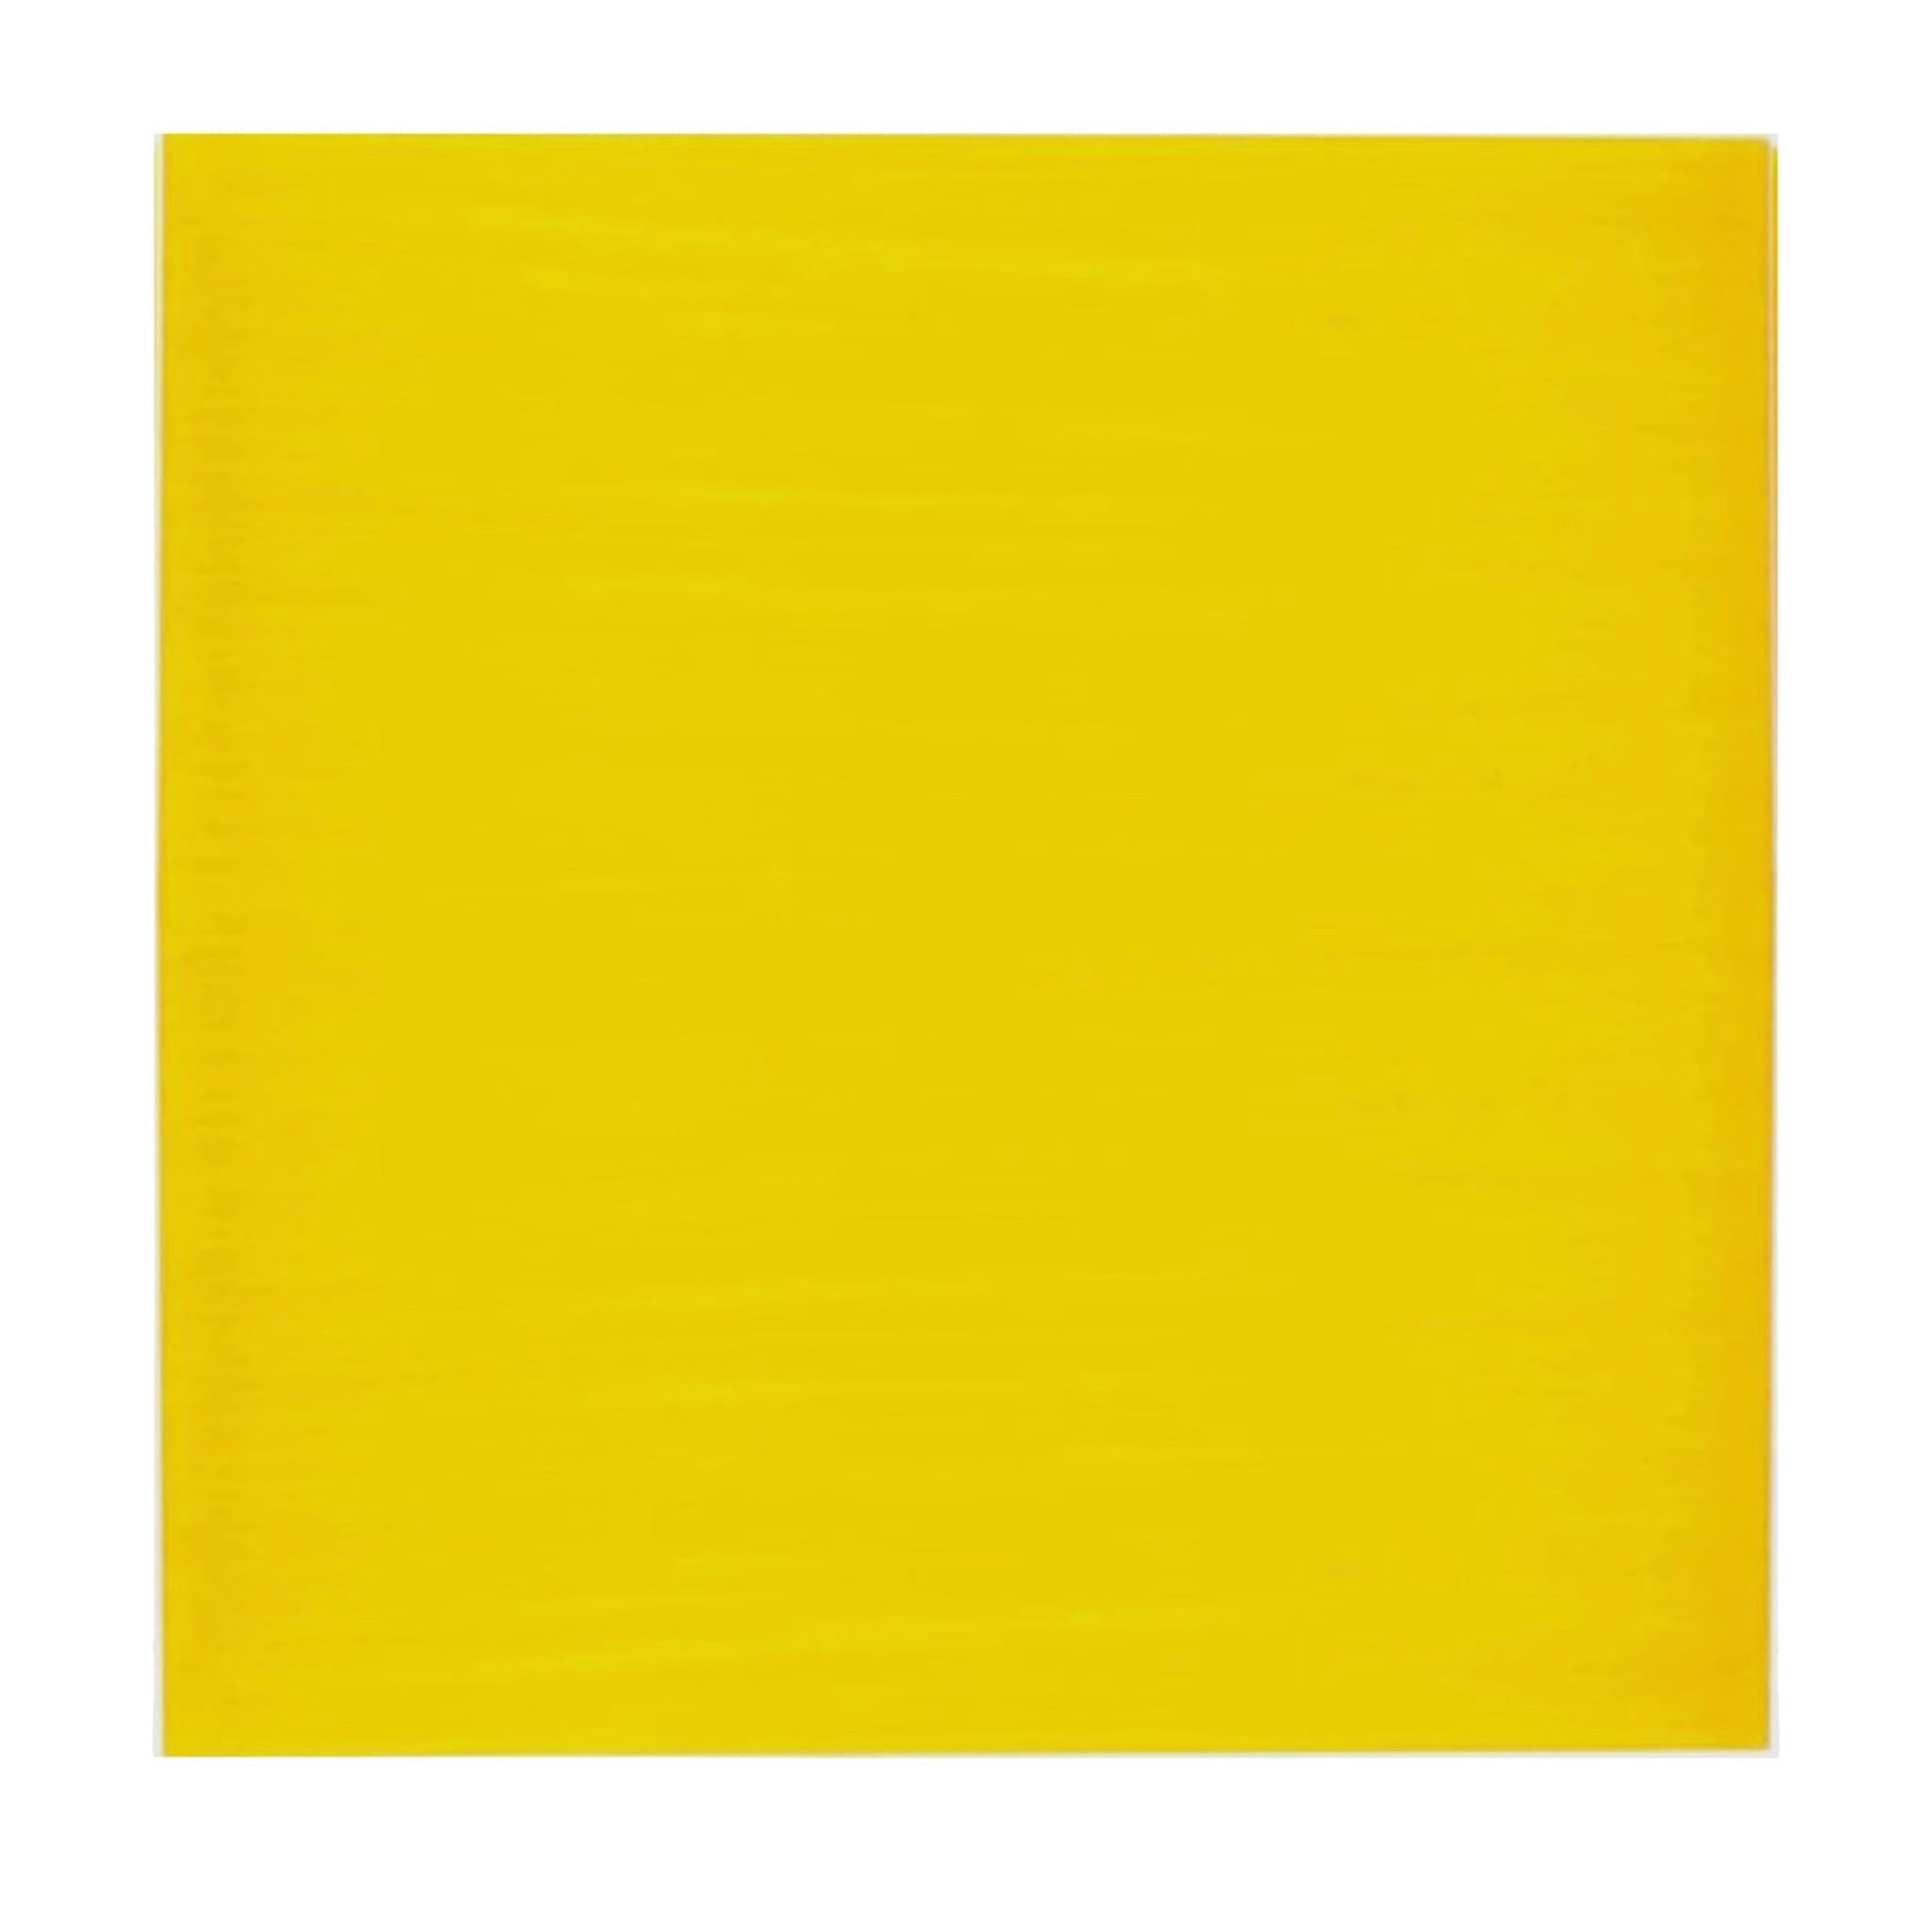 Cromie C2 Yellow Set of 25 Square Tiles - Main view